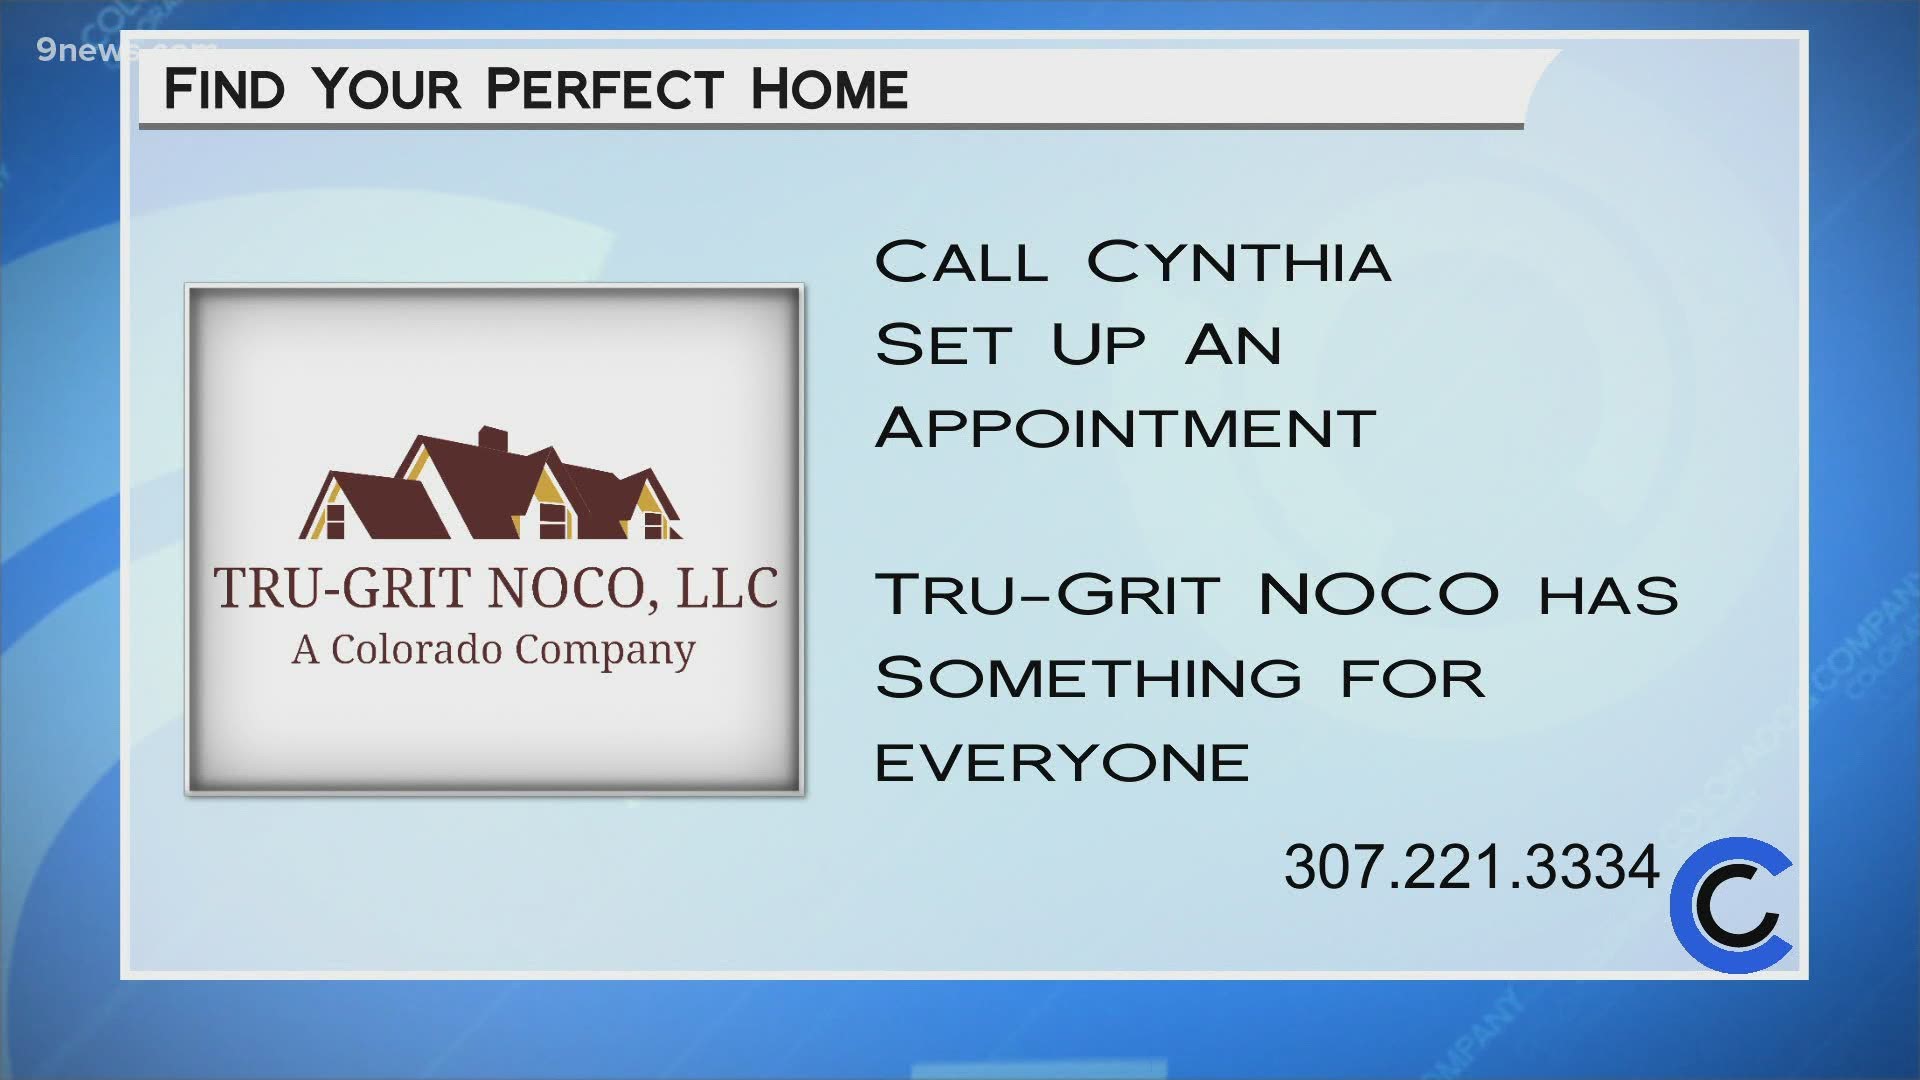 Tru Grit is building top of the line homes in Northern Colorado. Check them out and learn more at MHBWY.com.